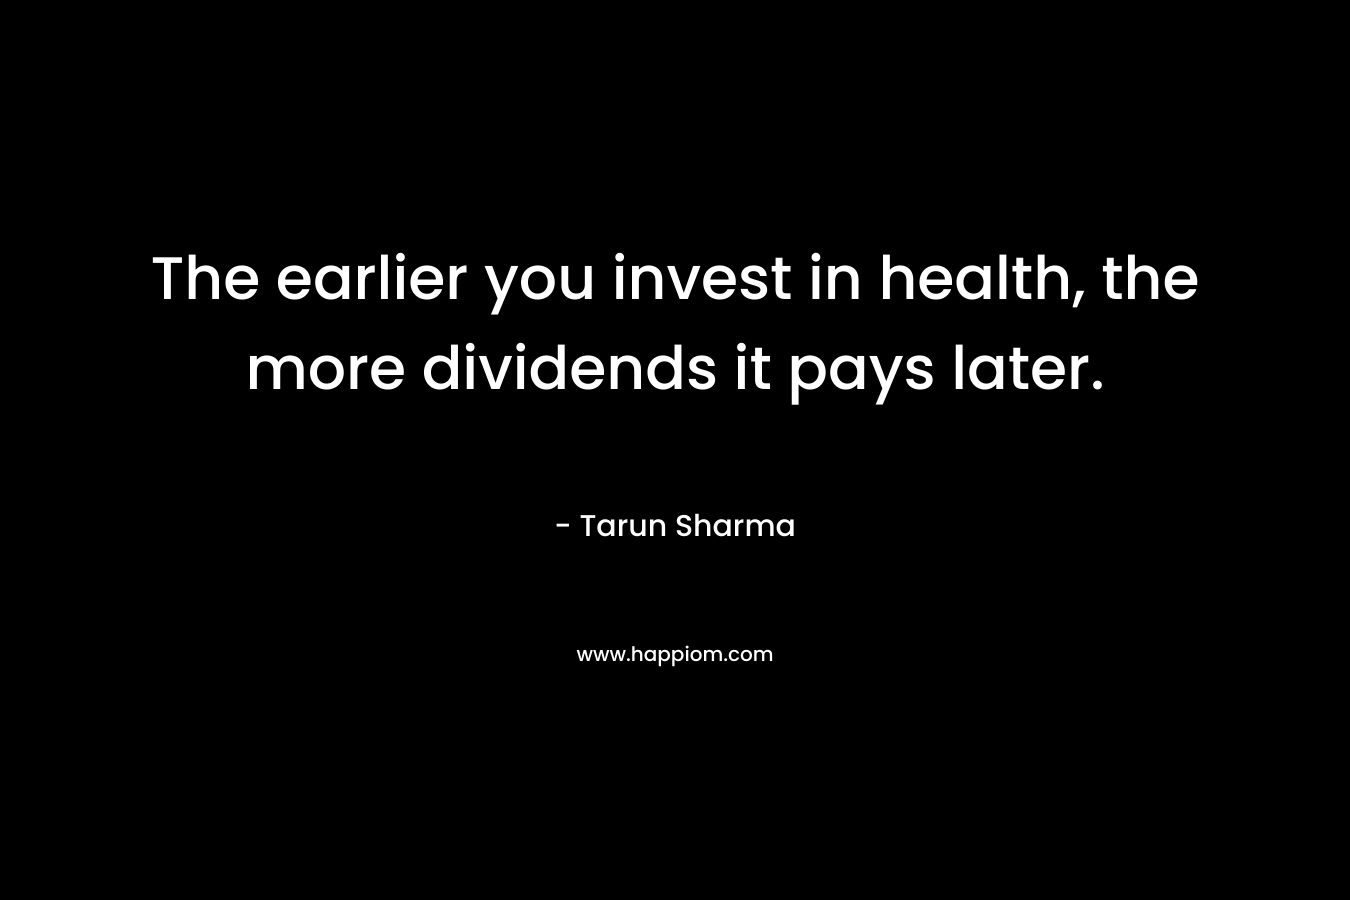 The earlier you invest in health, the more dividends it pays later. – Tarun Sharma